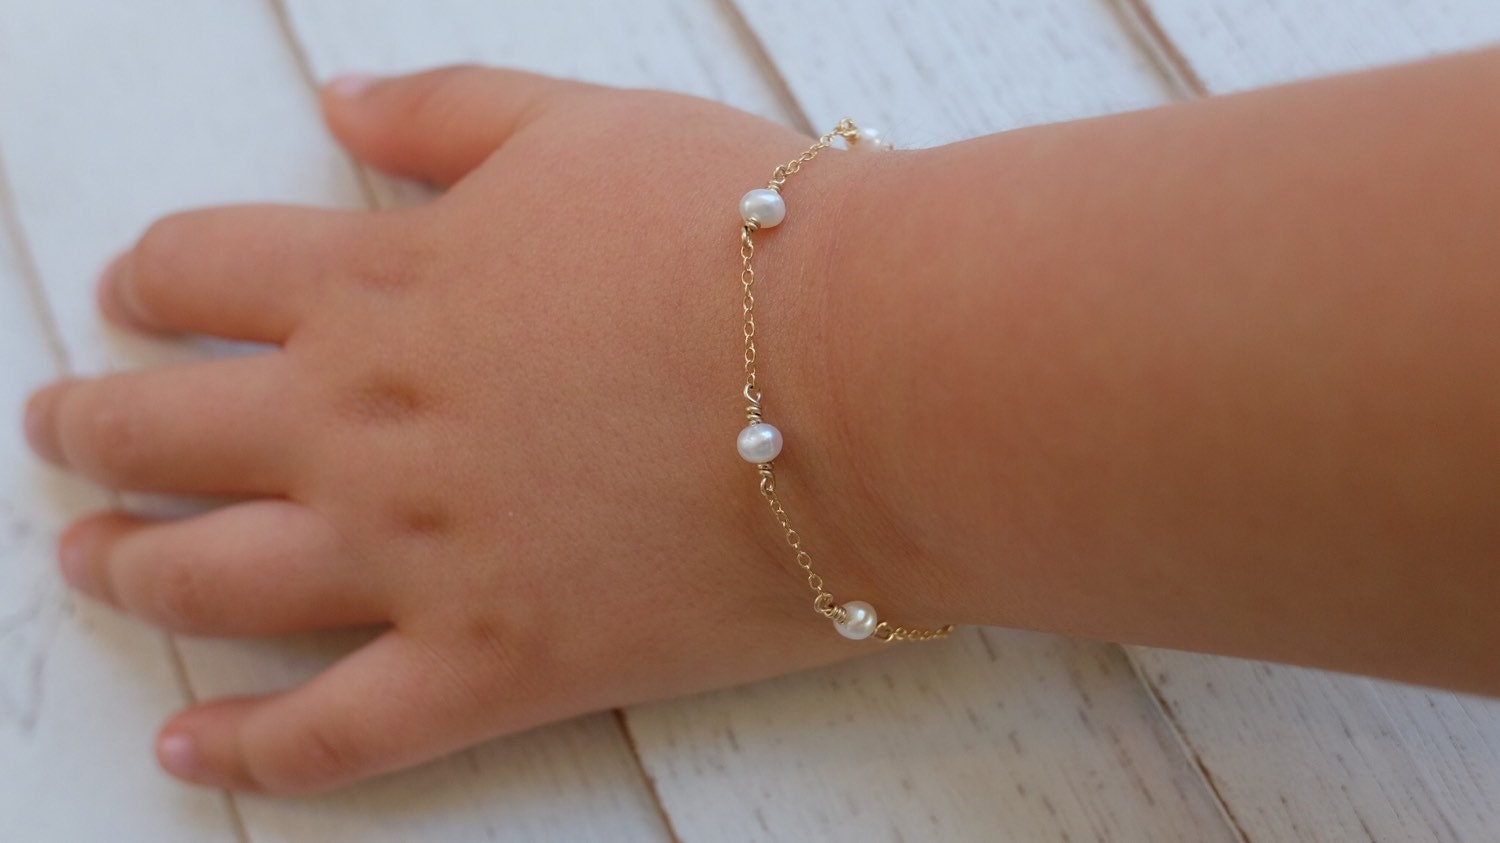 Buy Gold Beaded Bracelet for Child Baby Infant Girl Tween Teen W/ Initial &  Birthstone Charm, Personalized Jewelry W/ 4mm Round Beads Online in India -  Etsy